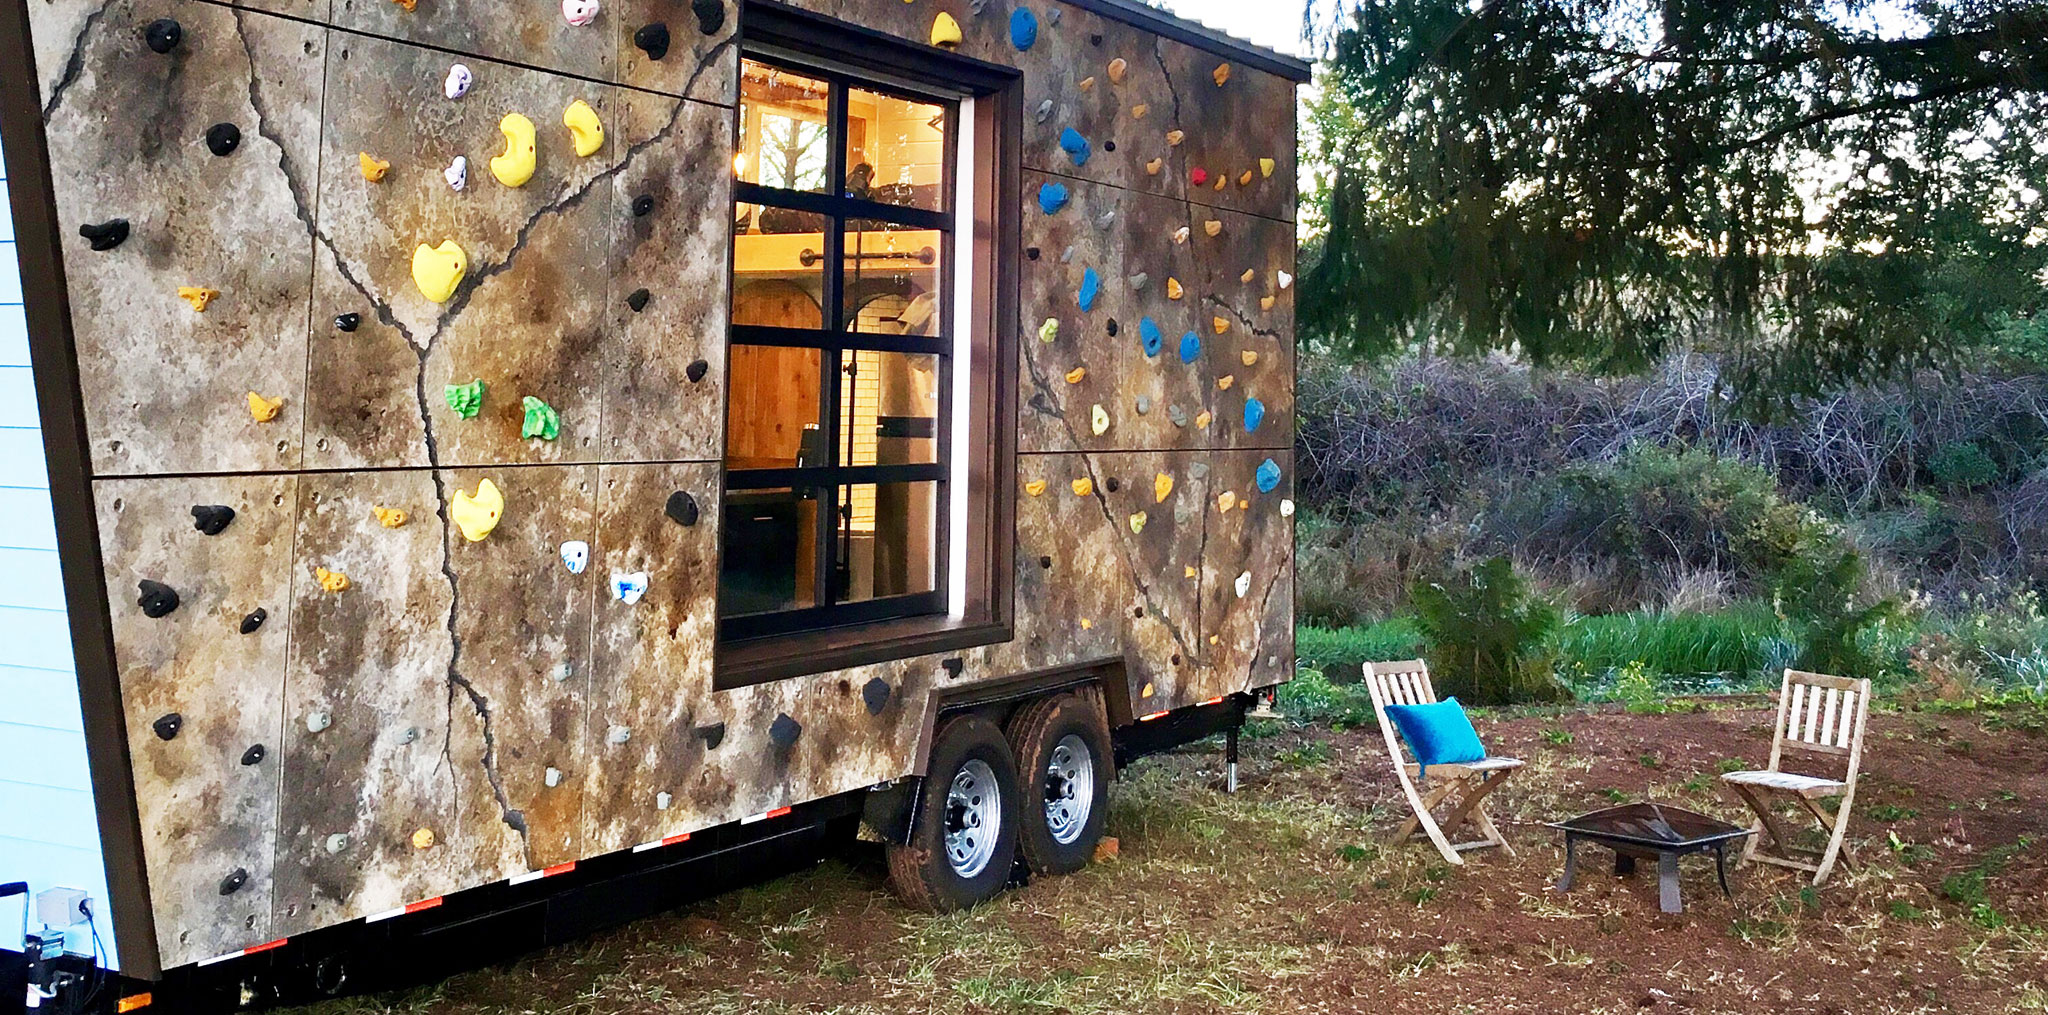 Climbing wall on the outside on an adventurous tiny home featured on our Tiny Home TV show